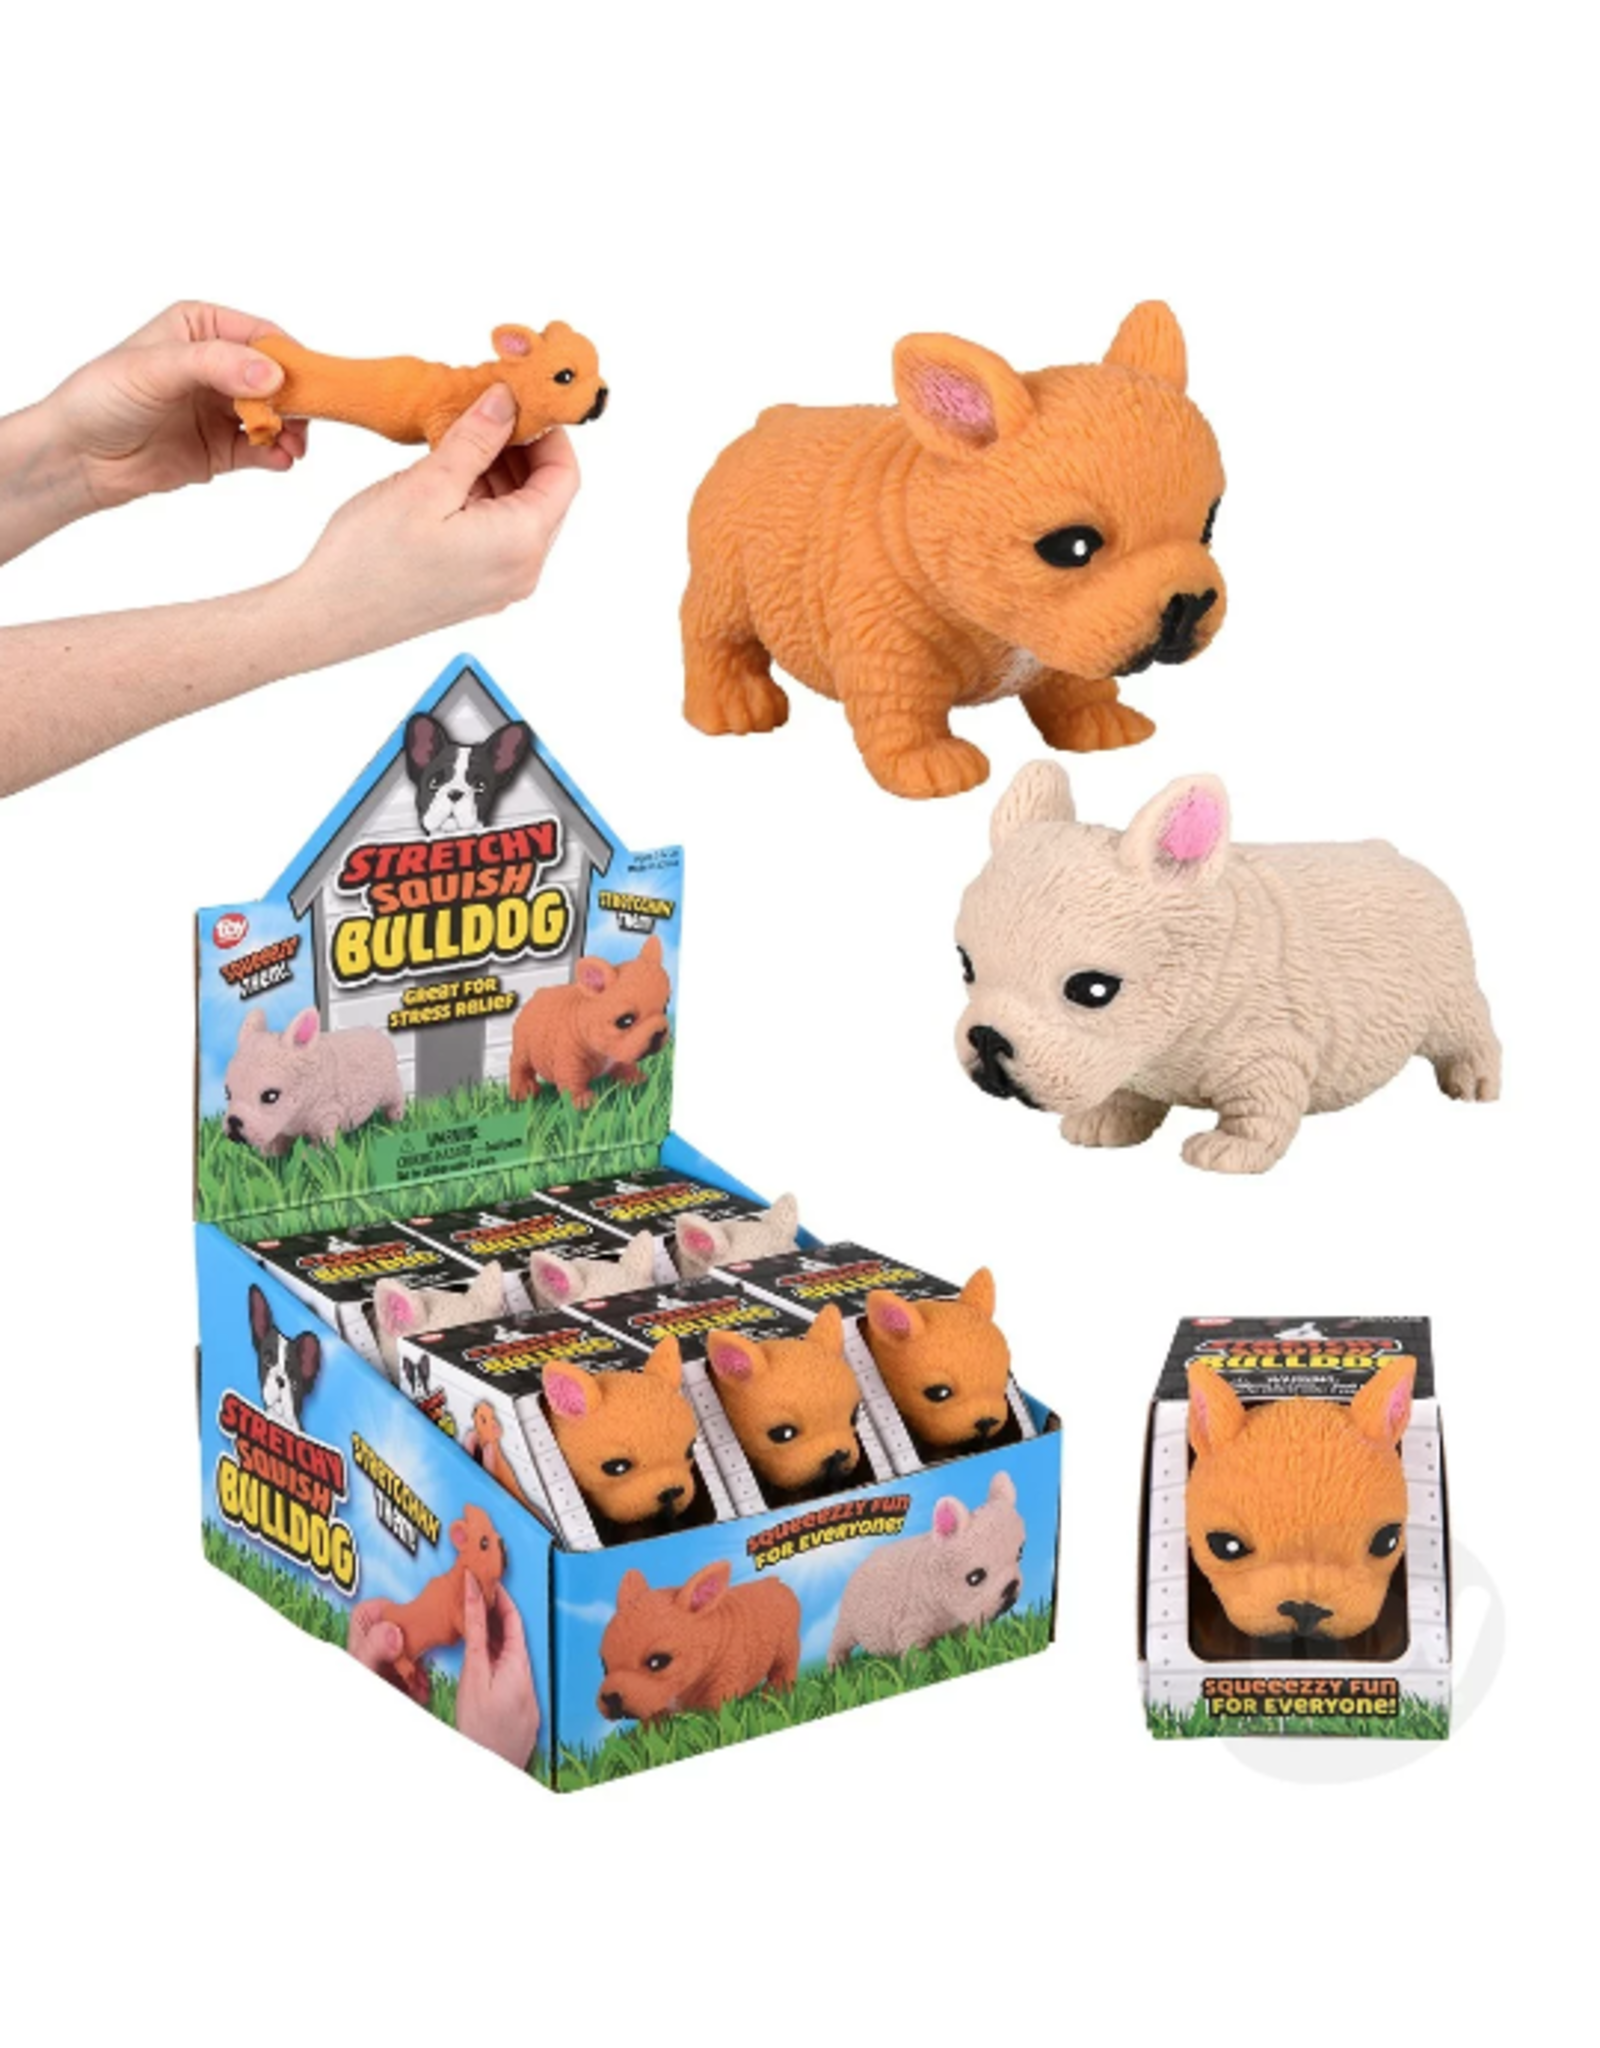 The Toy Network 3.25" Stretchy, Squish Bulldog